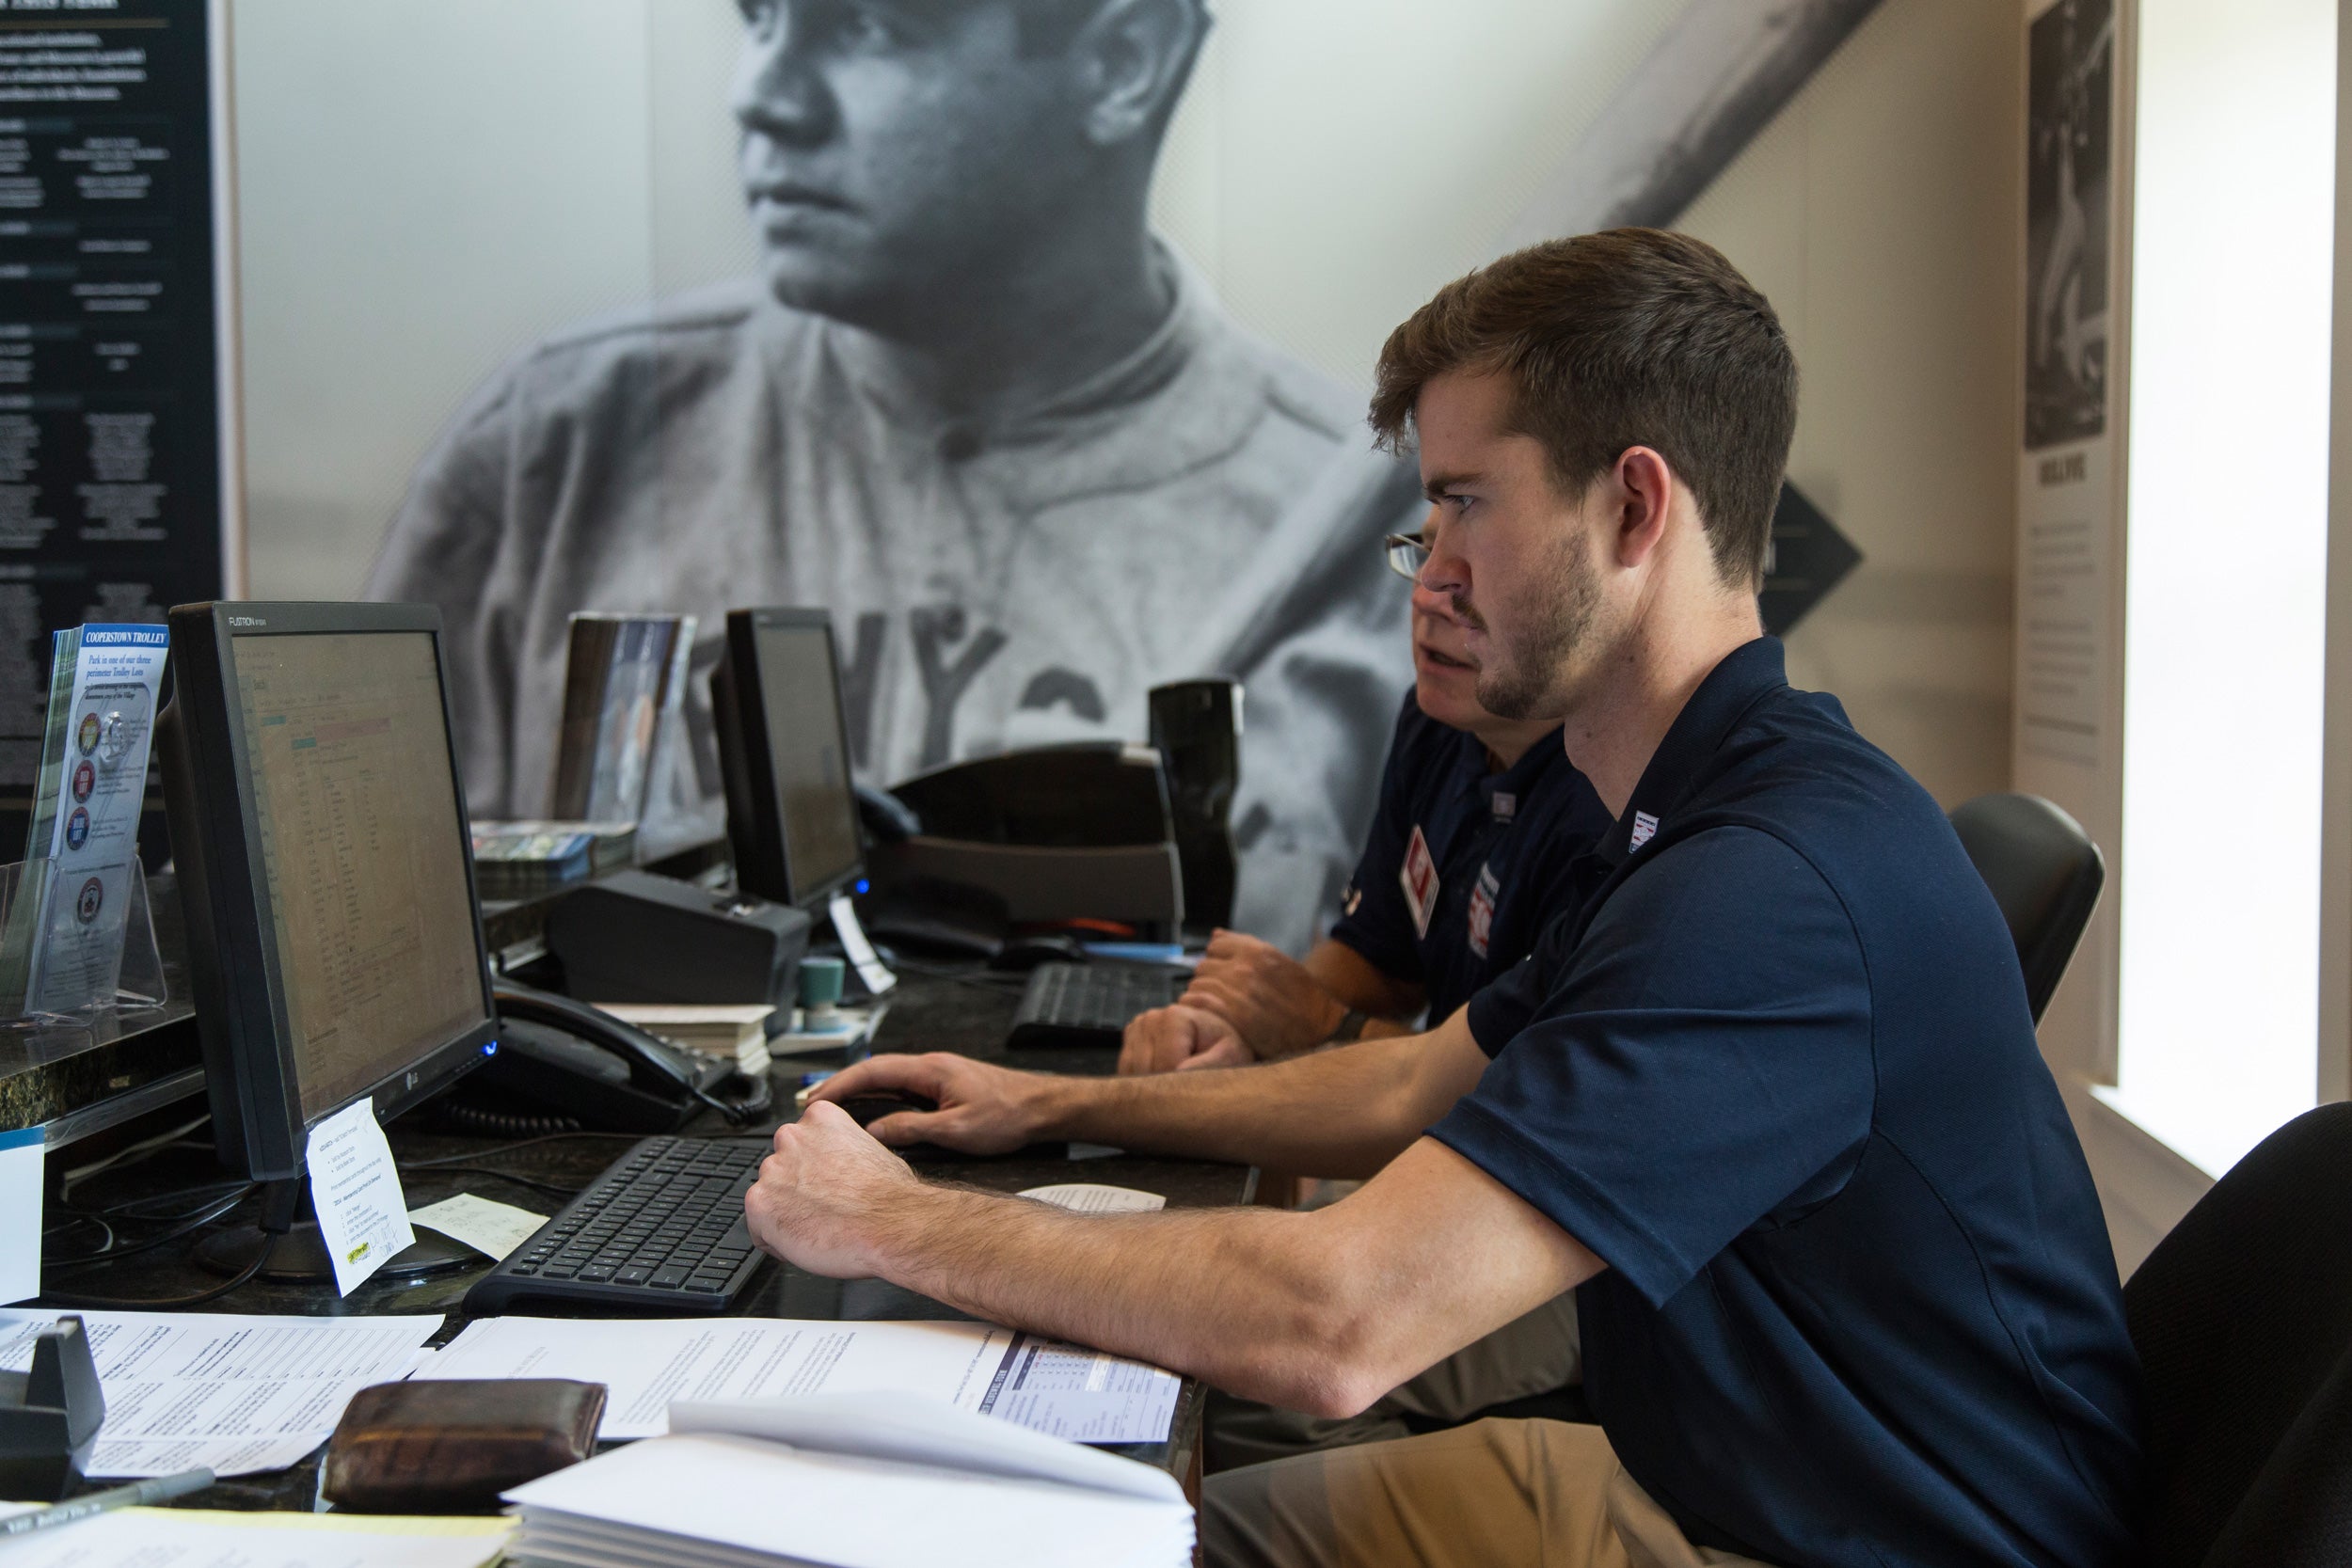 Jonathan Chodzko was a 2015 development intern in the Frank and Peggy Steele Internship Program at the National Baseball Hall of Fame and Museum. (Parker Fish / National Baseball Hall of Fame Library)